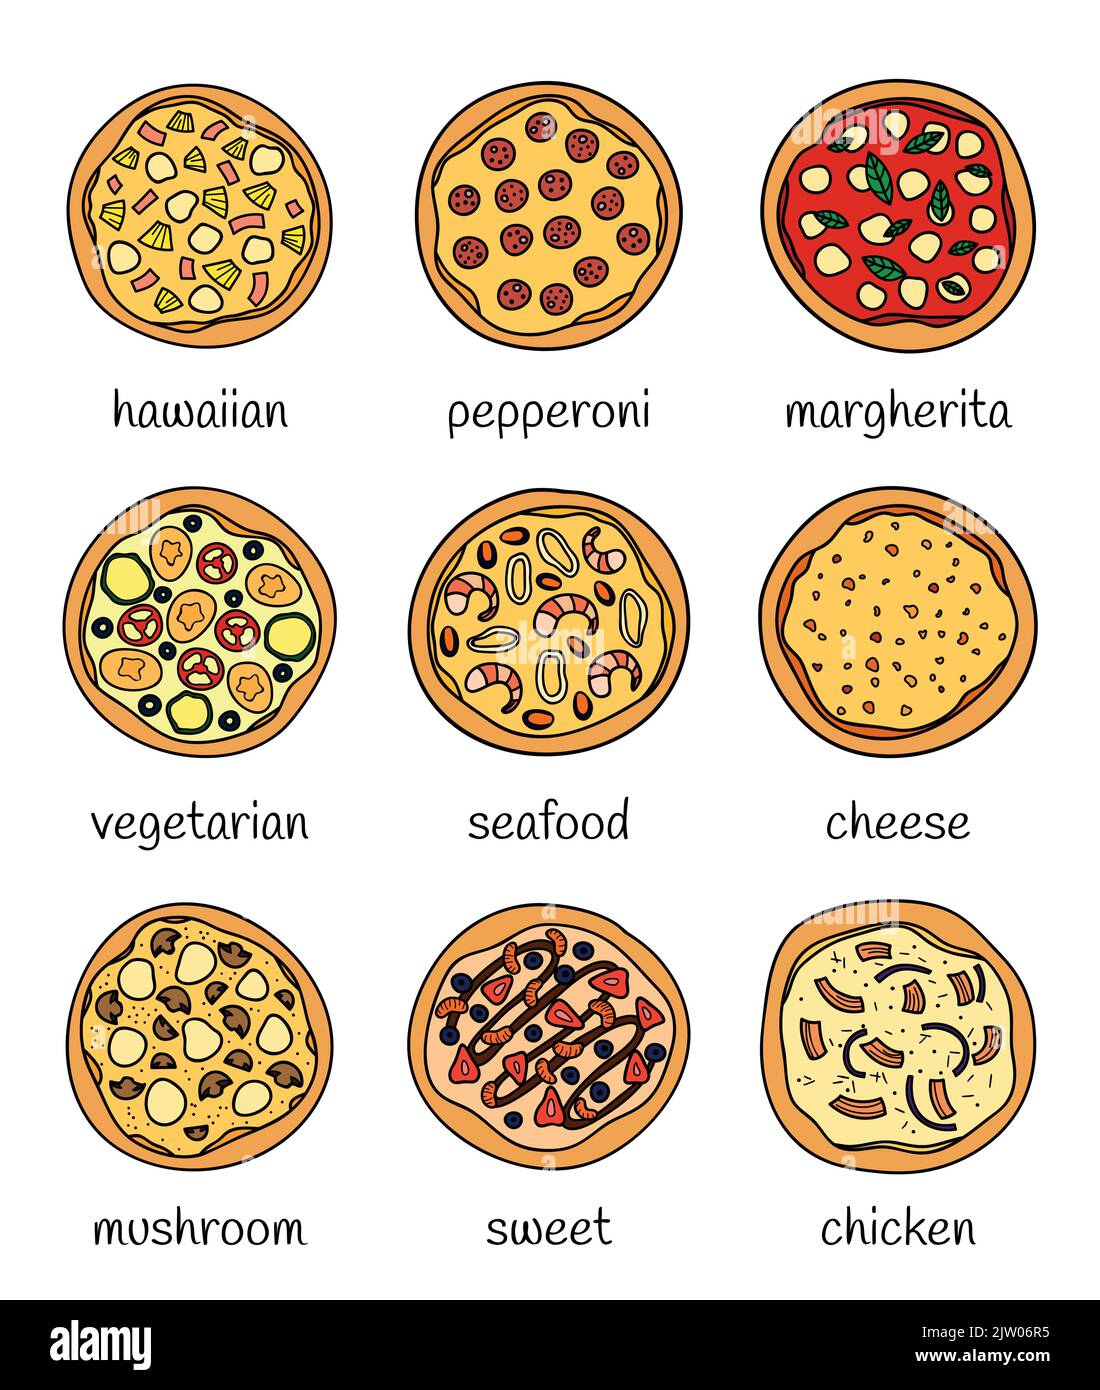 Shrimp on pizza Cut Out Stock Images & Pictures - Page 2 - Alamy